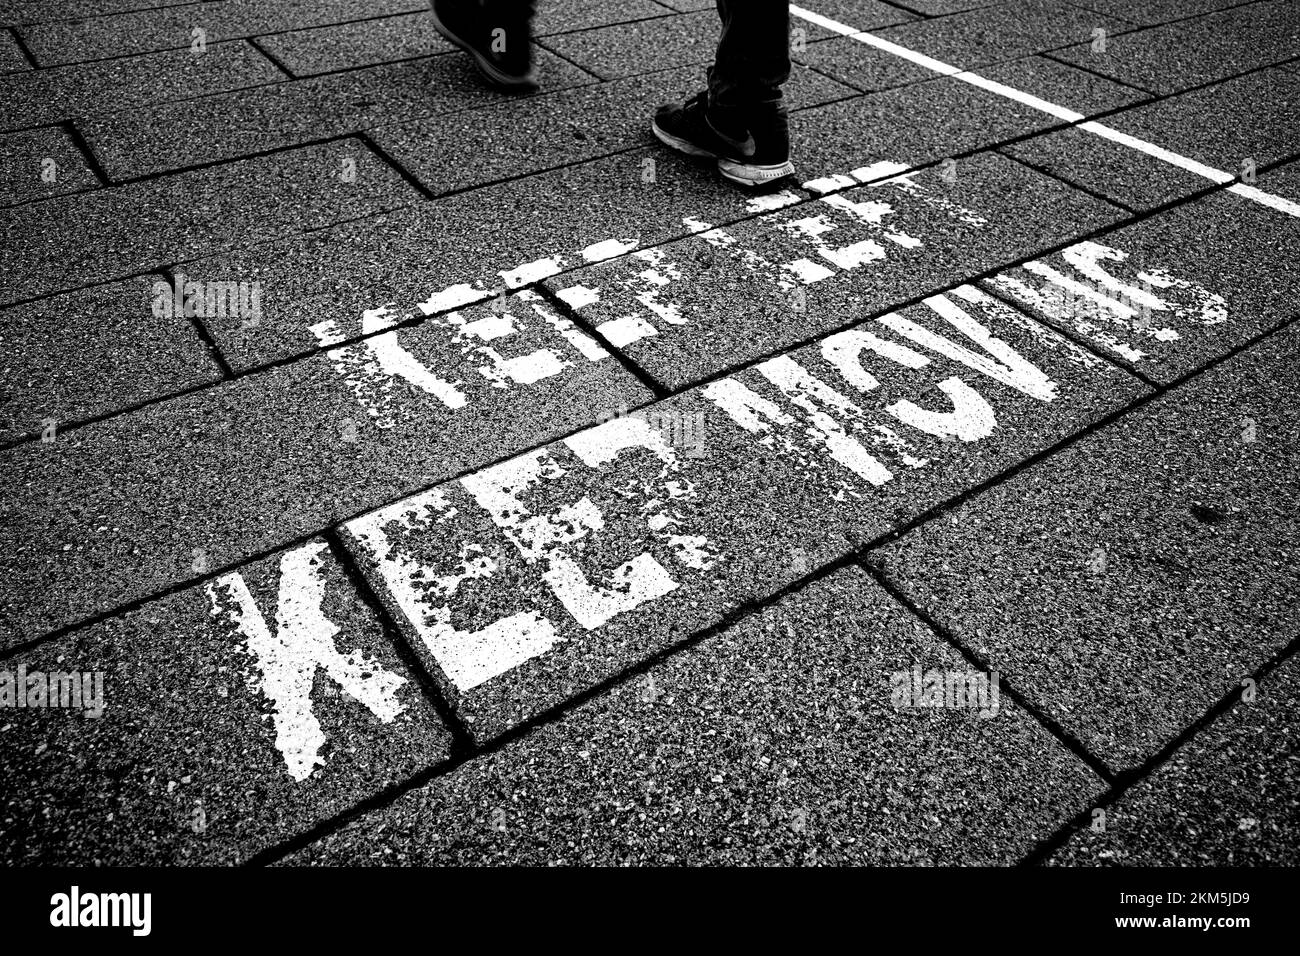 Pavement level view of feet walking. Sign on pavement saying Keep Left, Keep Moving Stock Photo